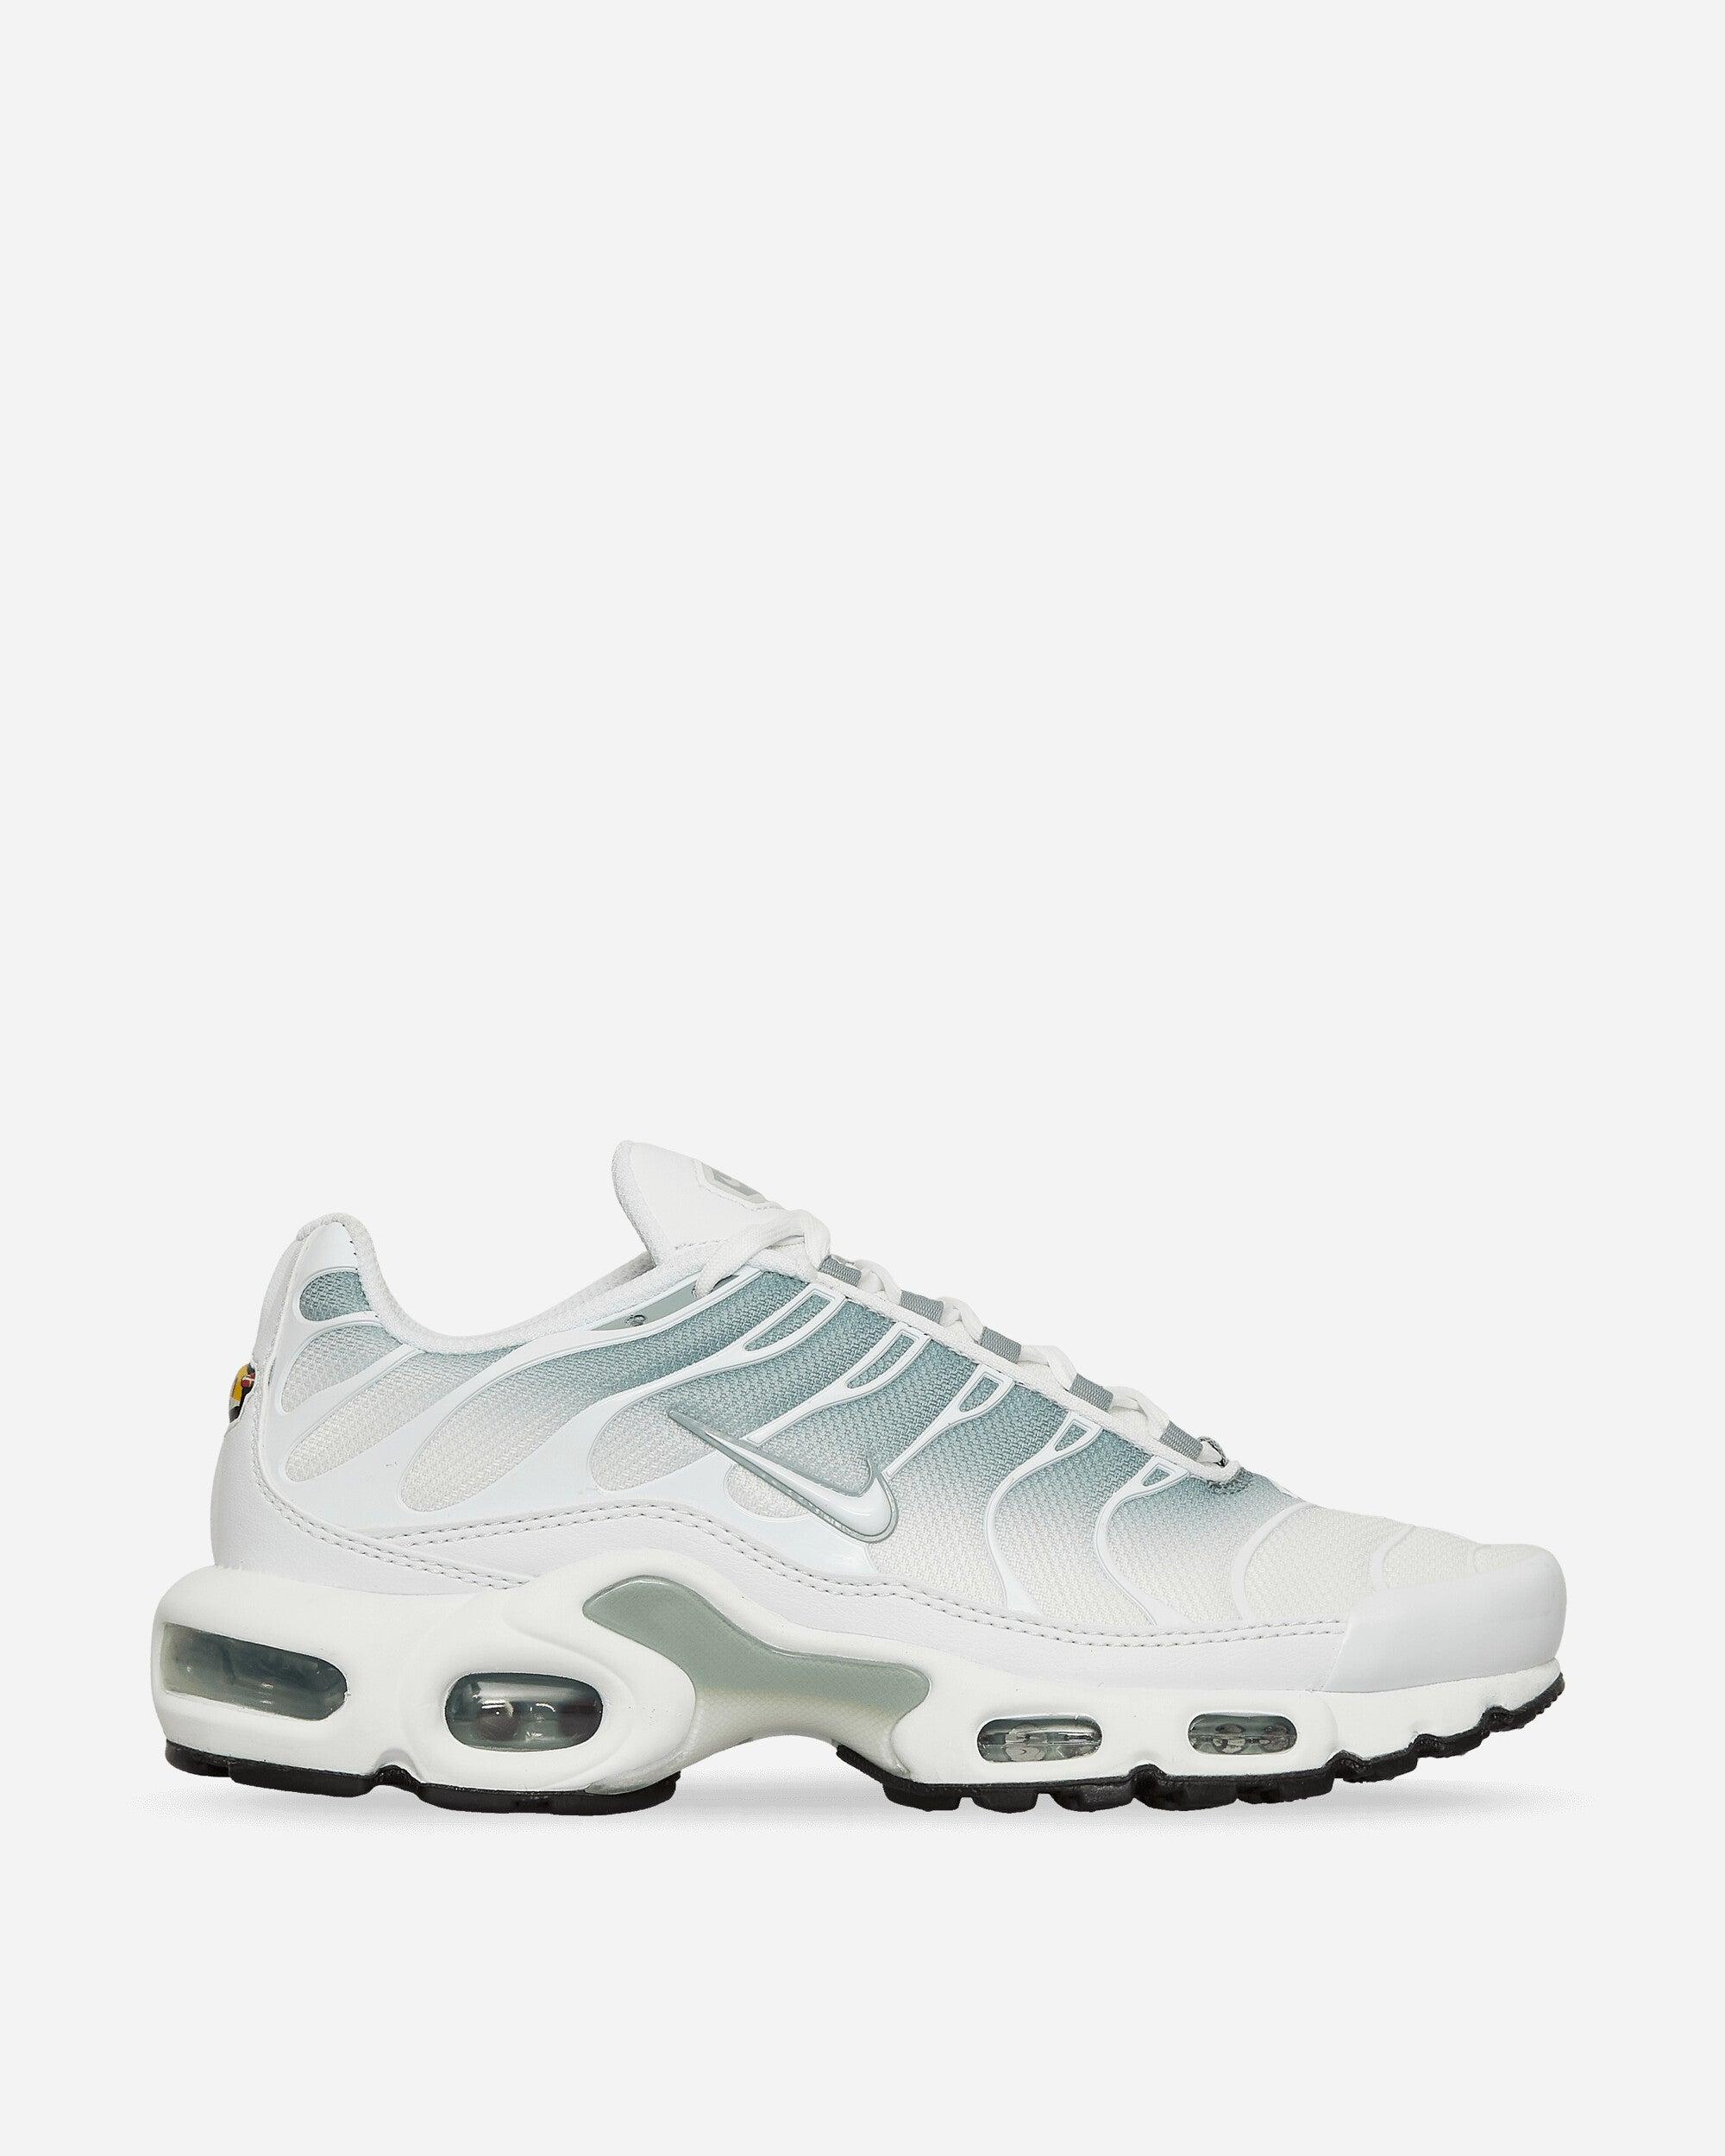 Nike Wmns Air Max Plus Sneakers White / Mica Green | Lyst